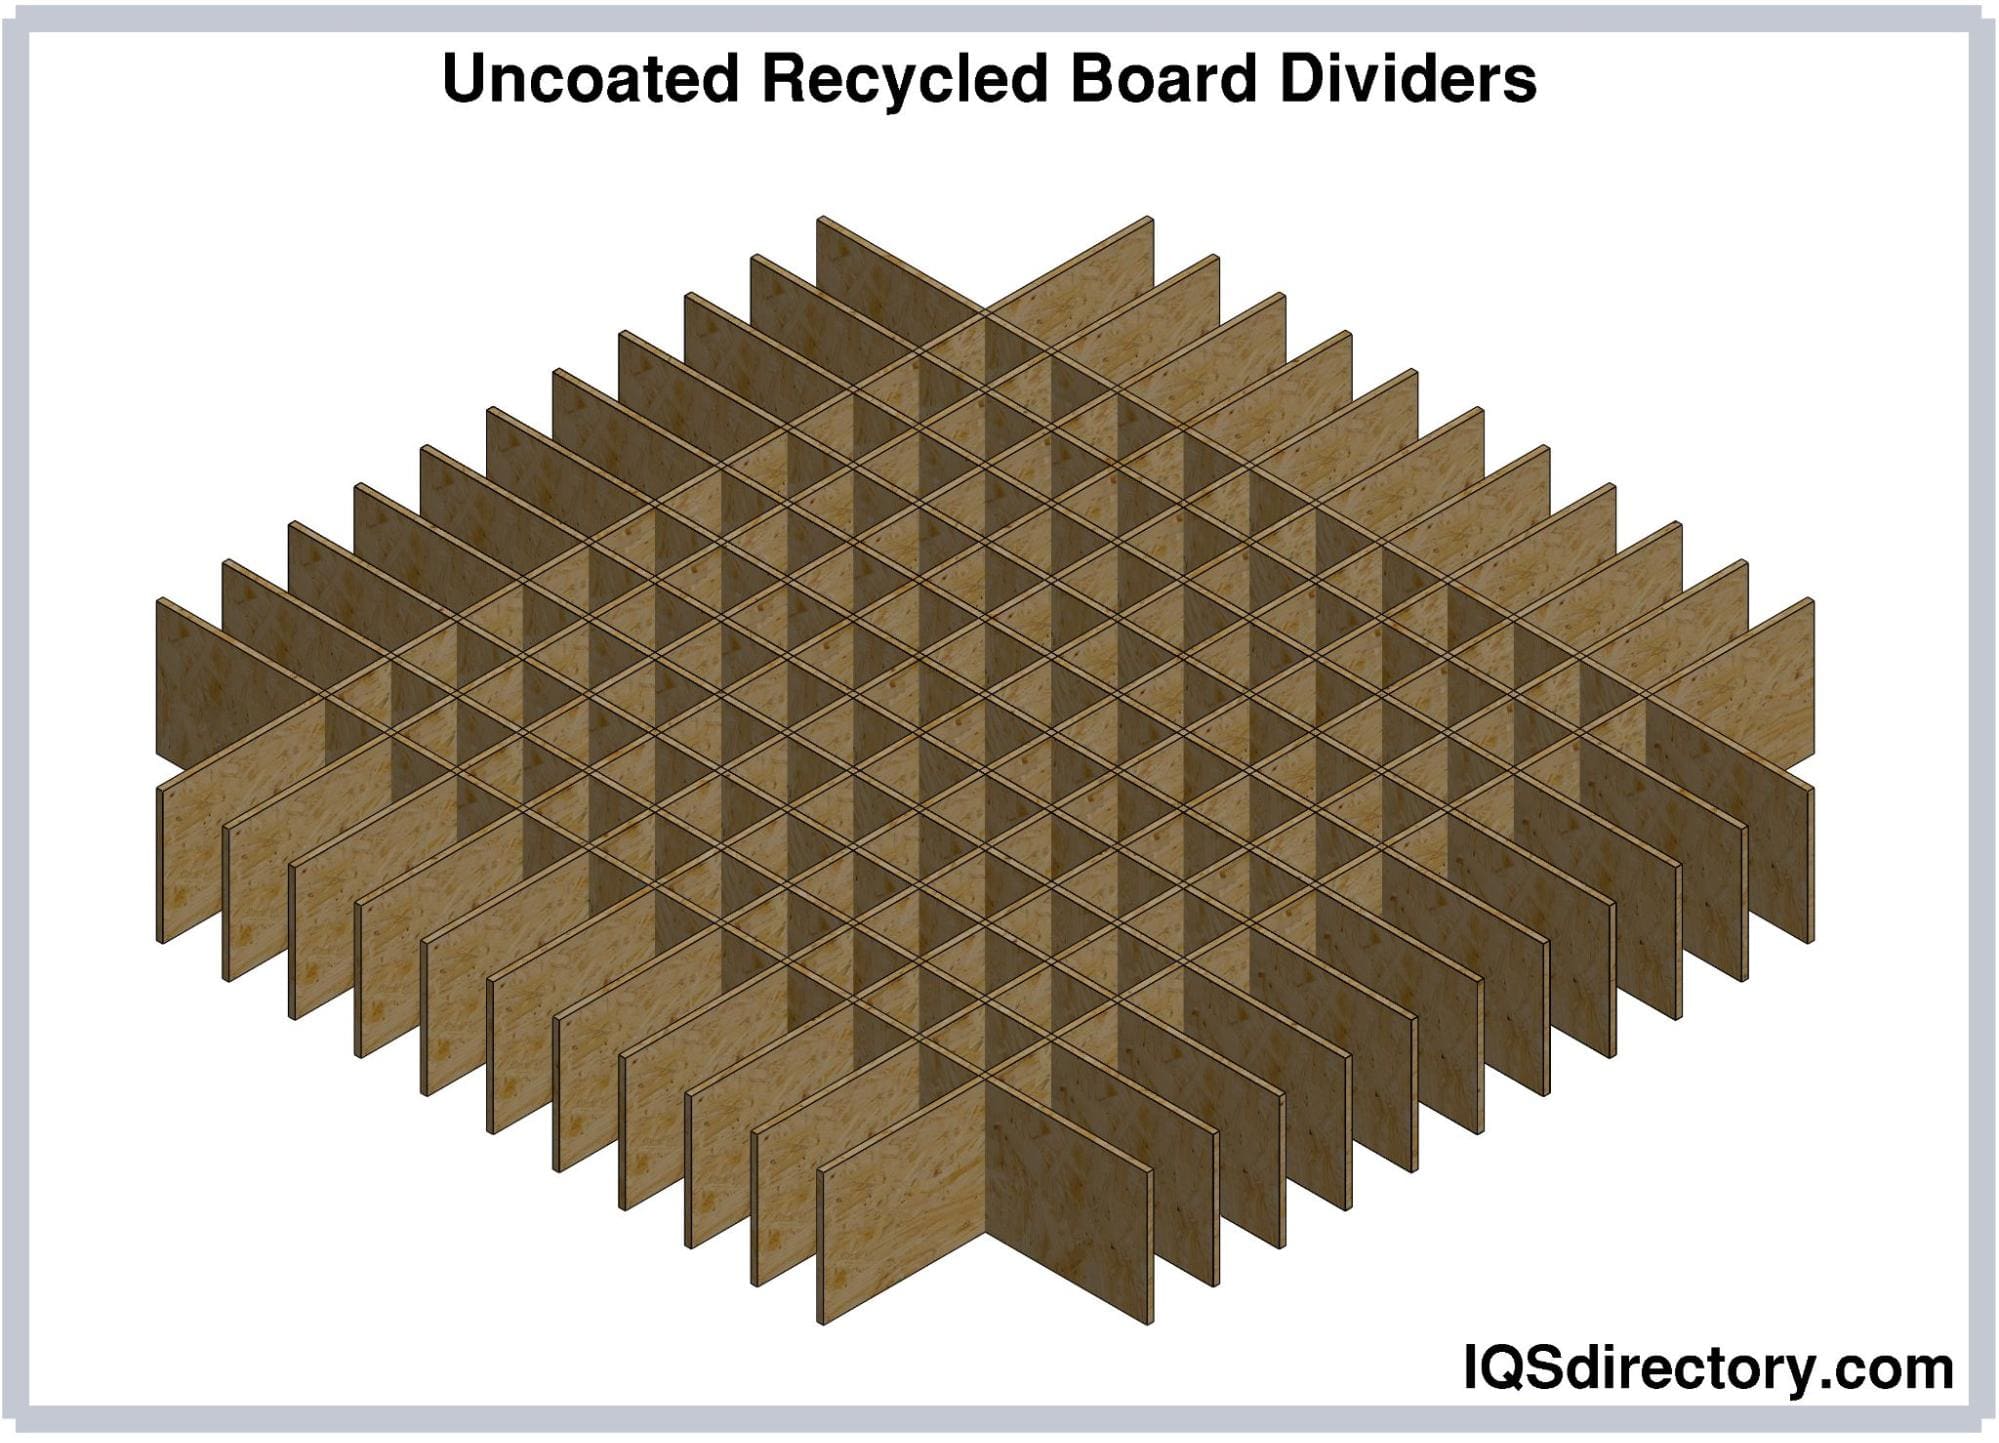 Uncoated Recycled Board Dividers